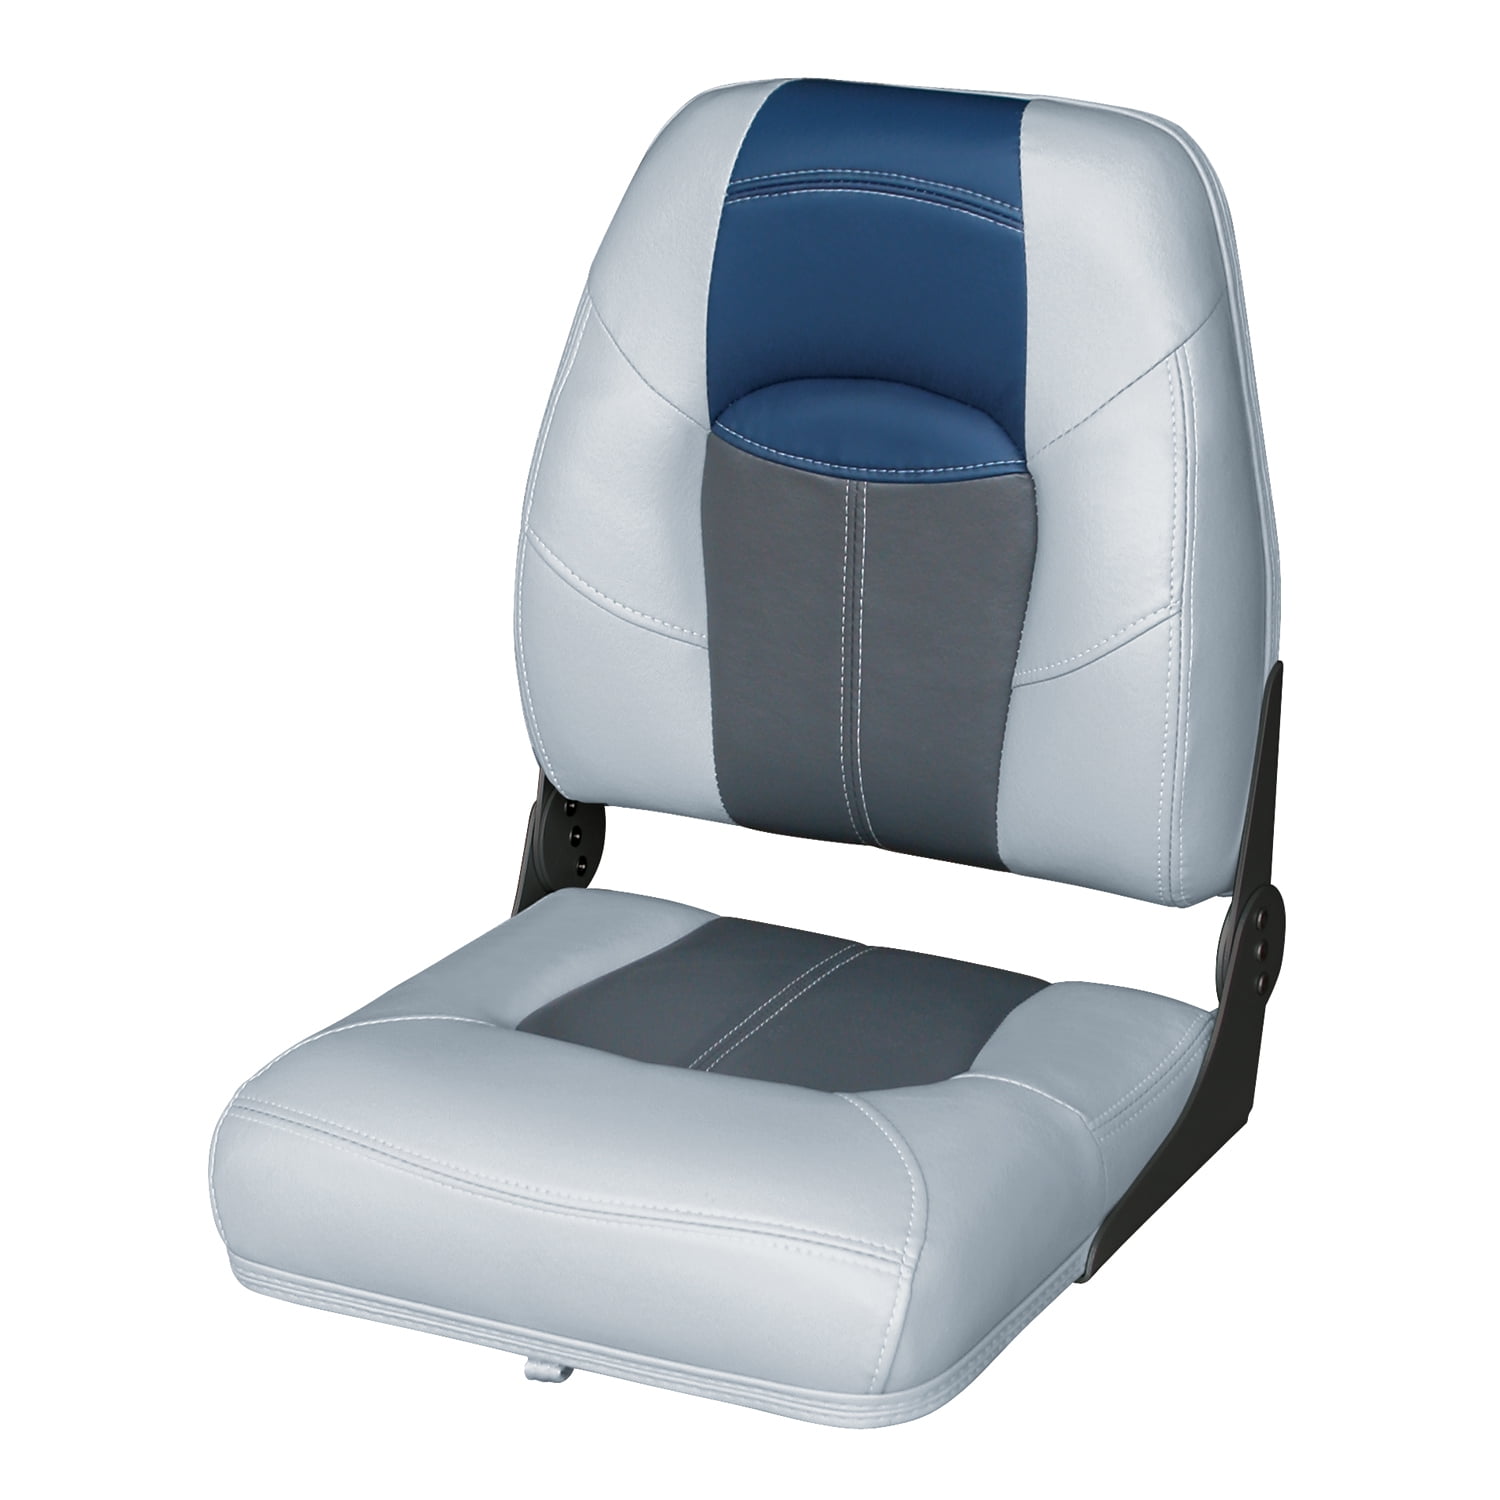 Taylor Made - Folding Pedestal Boat Seat Cover Vinyl White